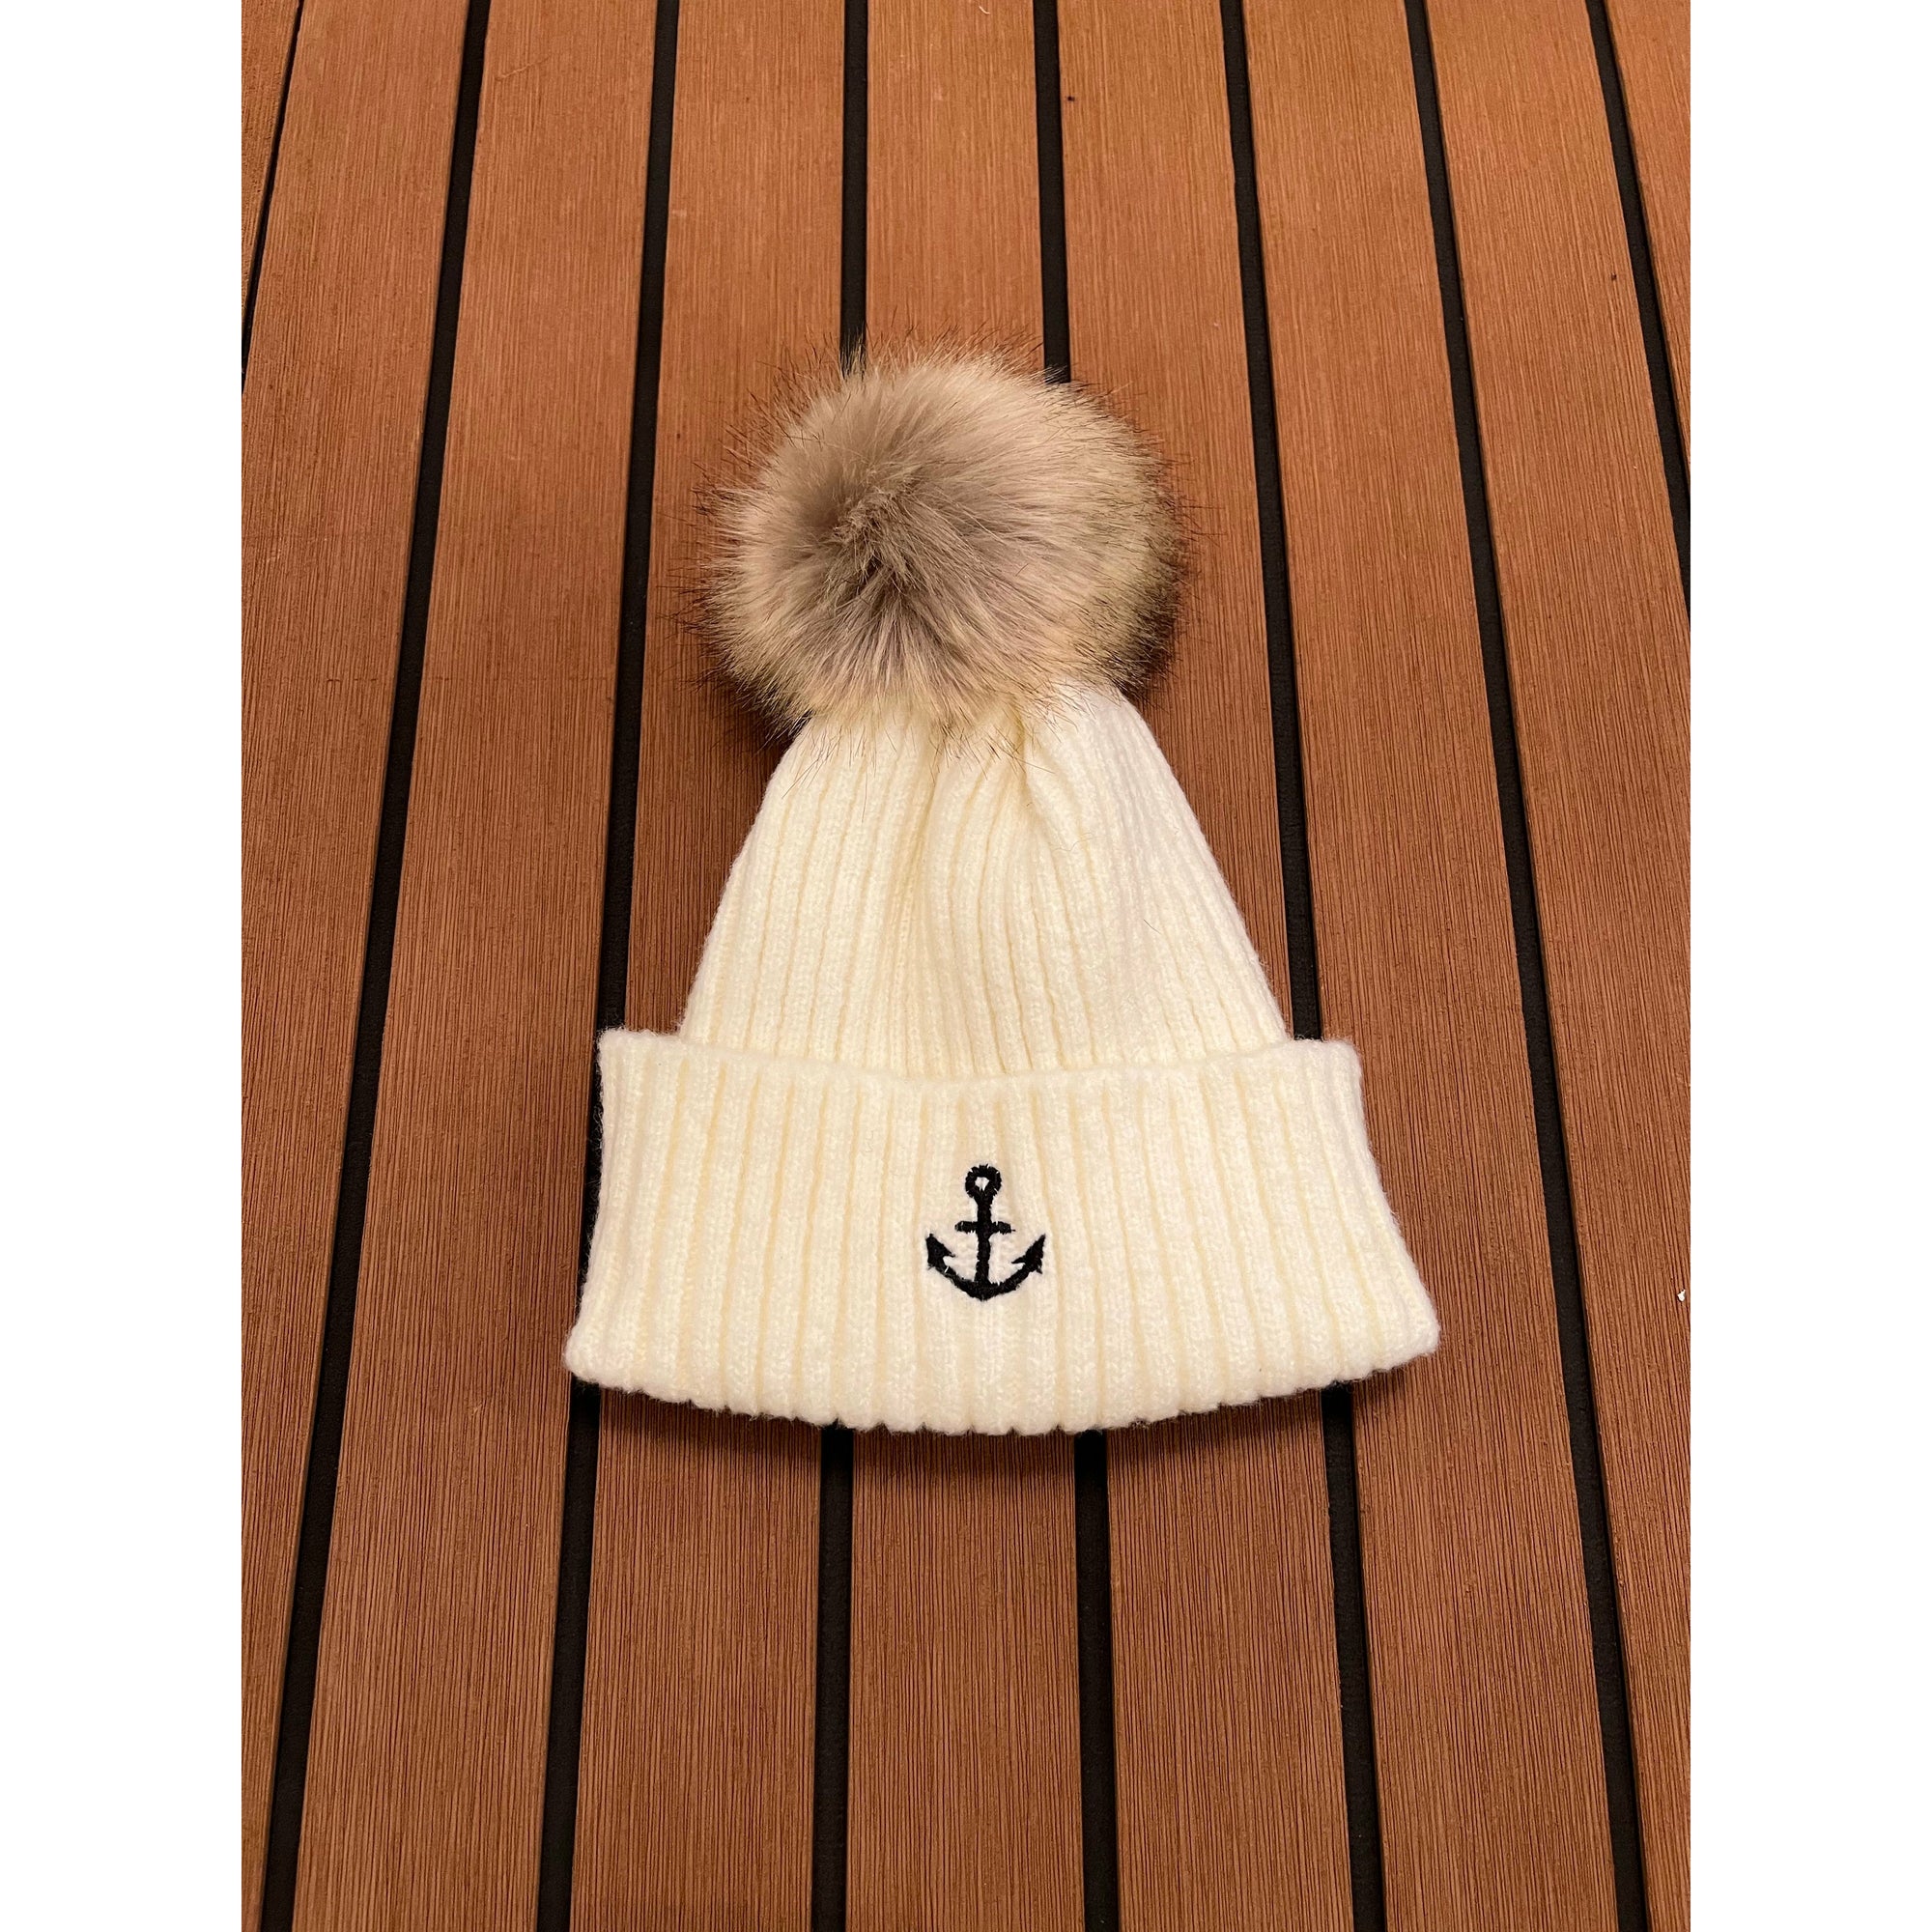 FORCE 10 OFFICIAL ⚓️ BOBBLE HAT - CREAM